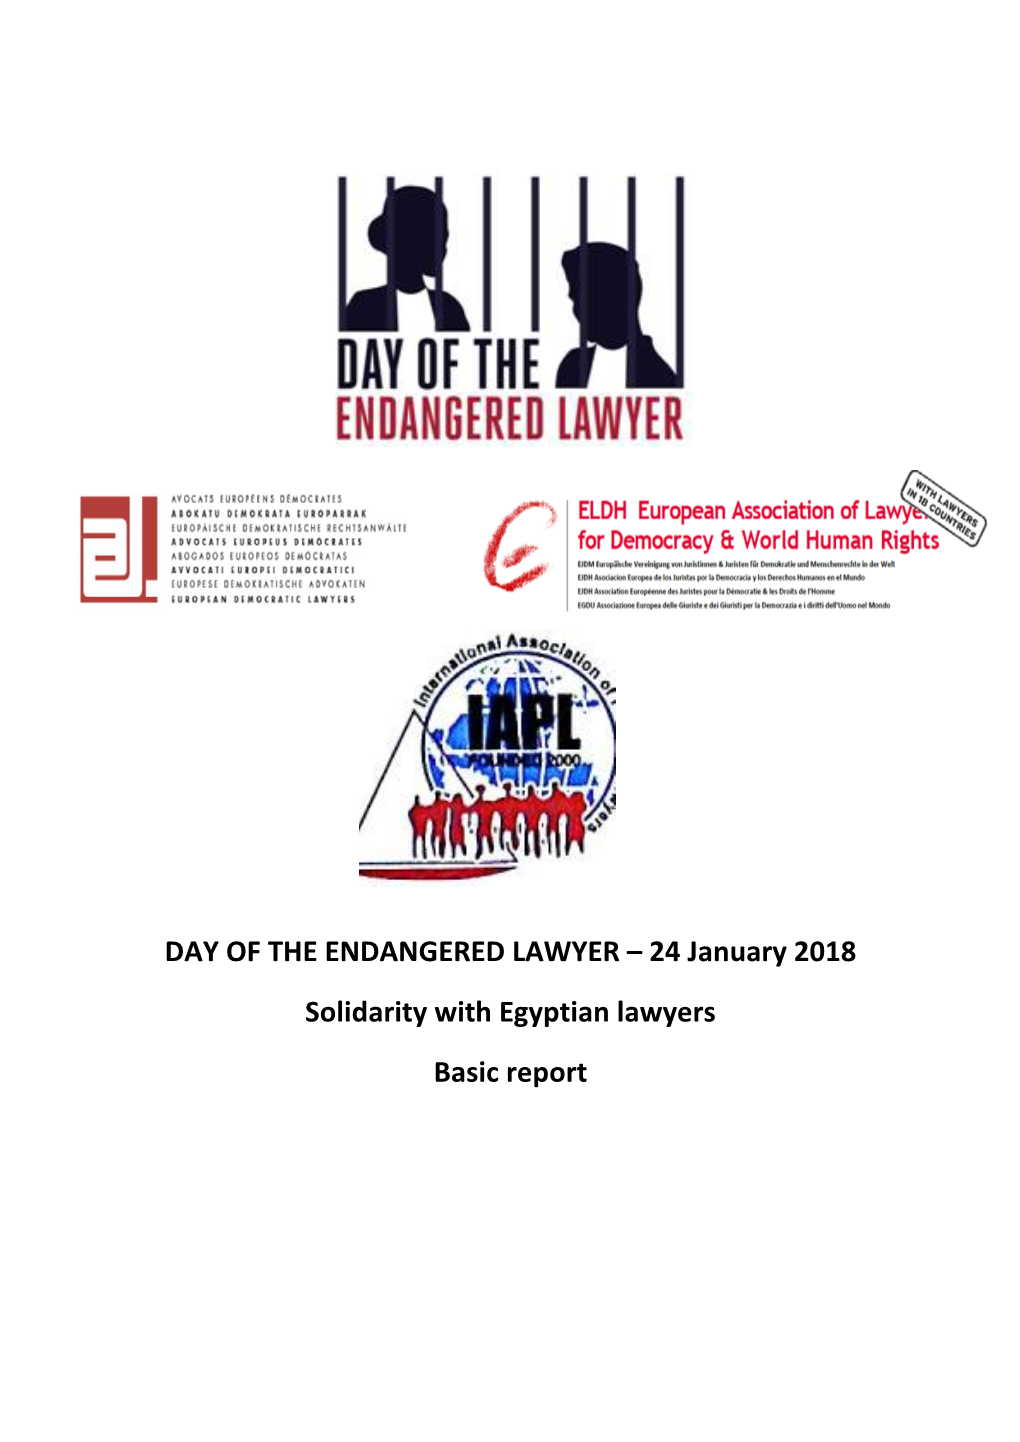 DAY of the ENDANGERED LAWYER – 24 January 2018 Solidarity with Egyptian Lawyers Basic Report